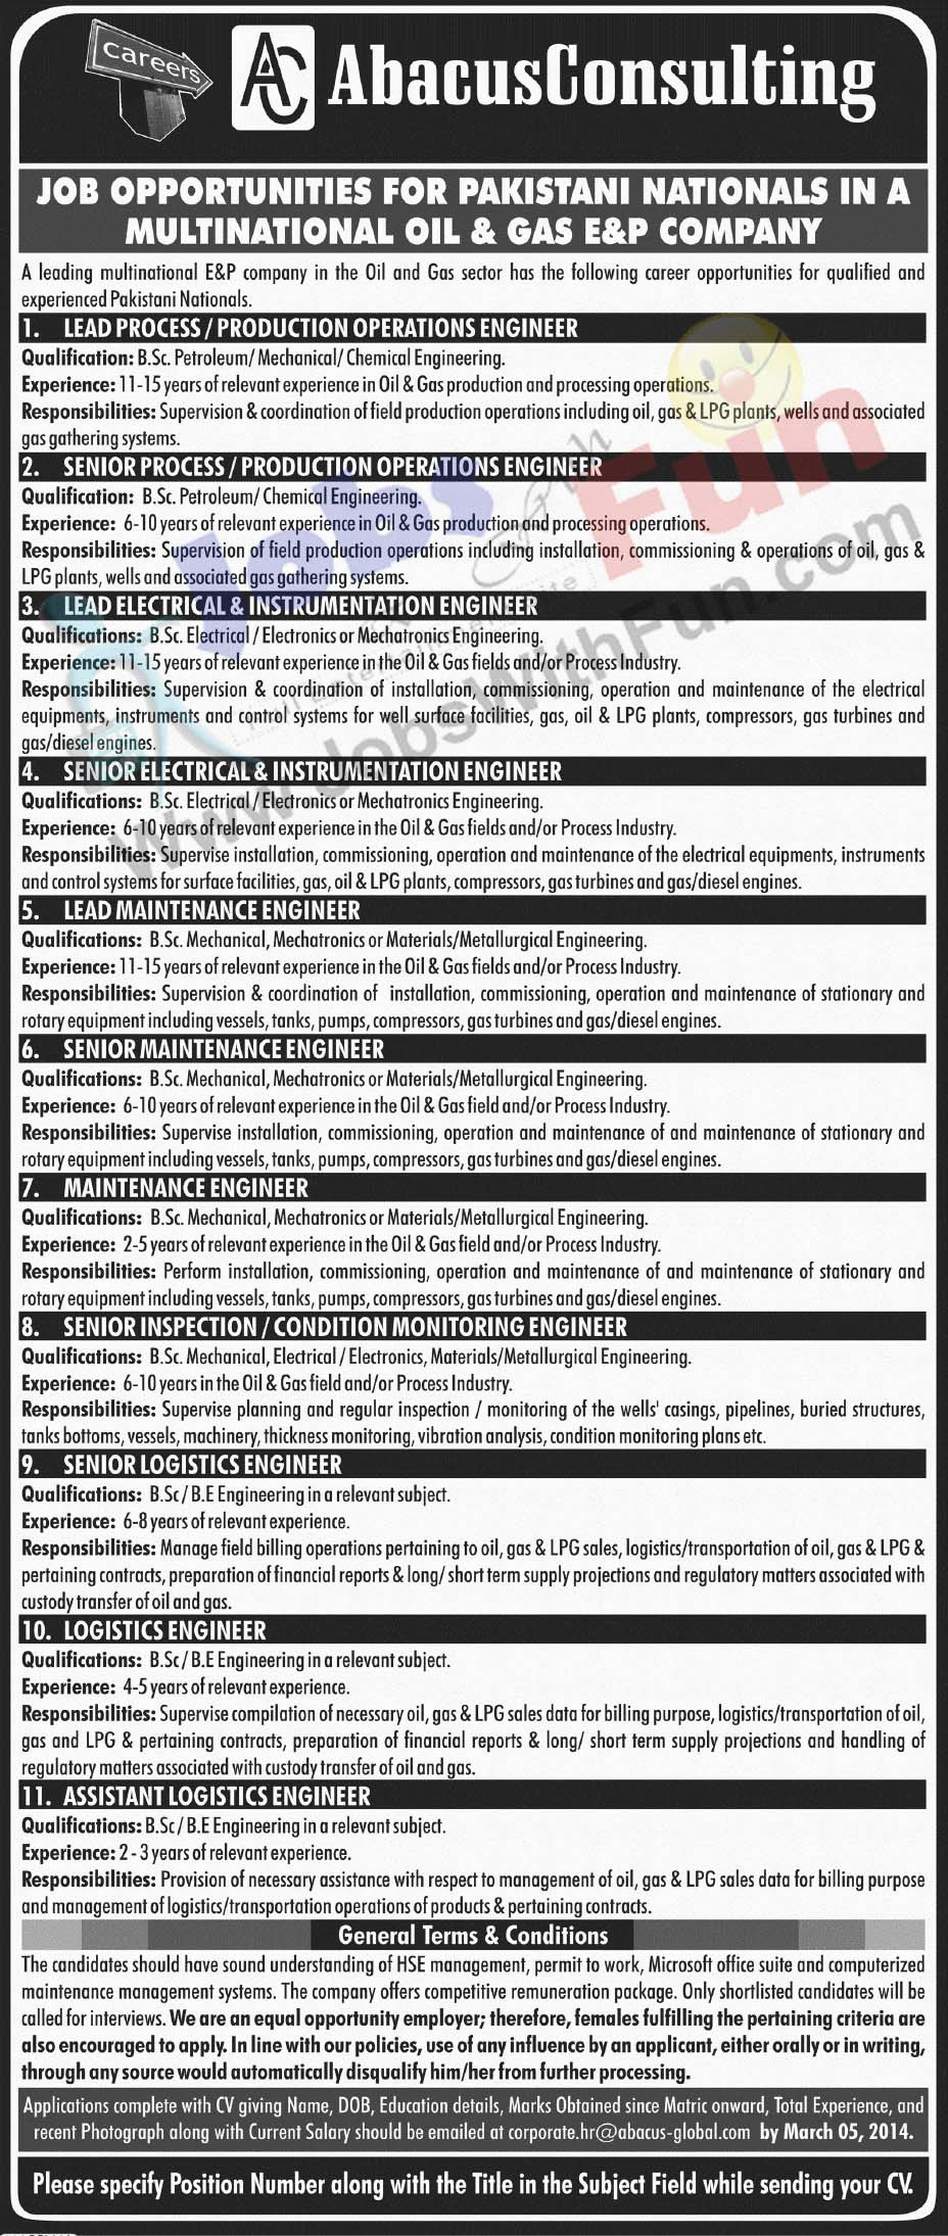 federal public service commission islamabad jobs